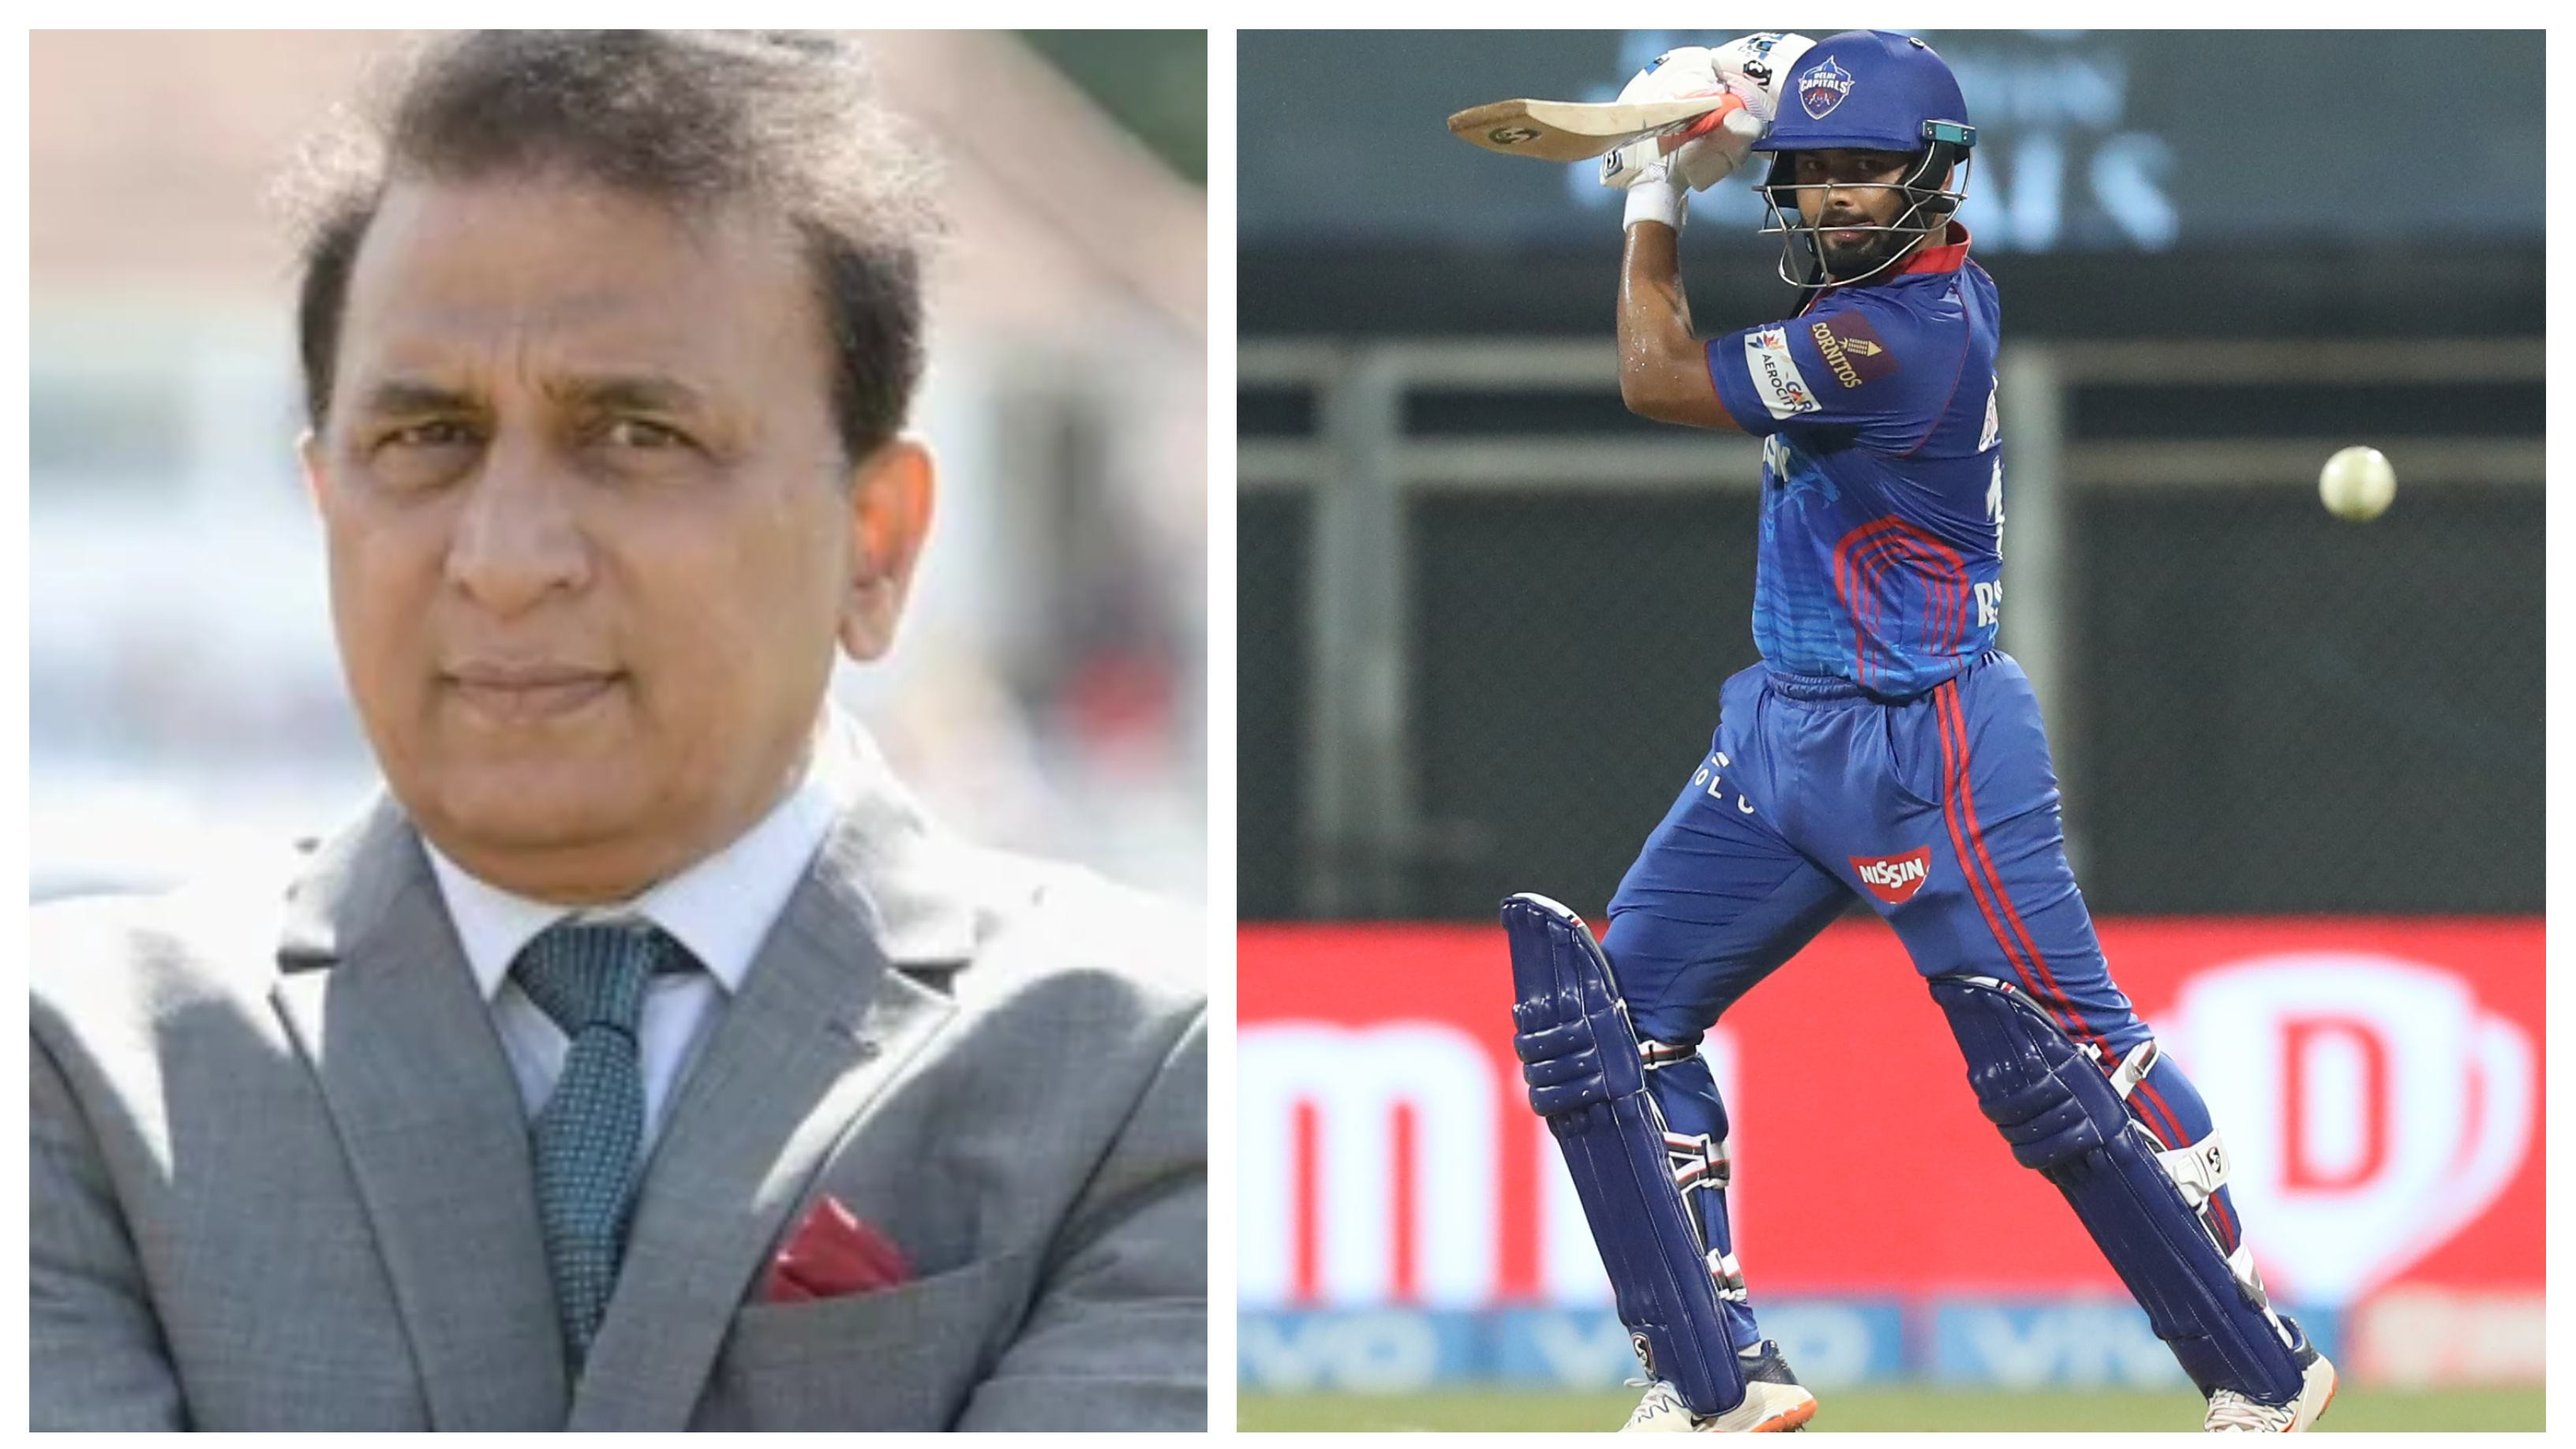 'He showed a spark that can become a roaring fire': Gavaskar hails Rishabh Pant’s captaincy in IPL 14